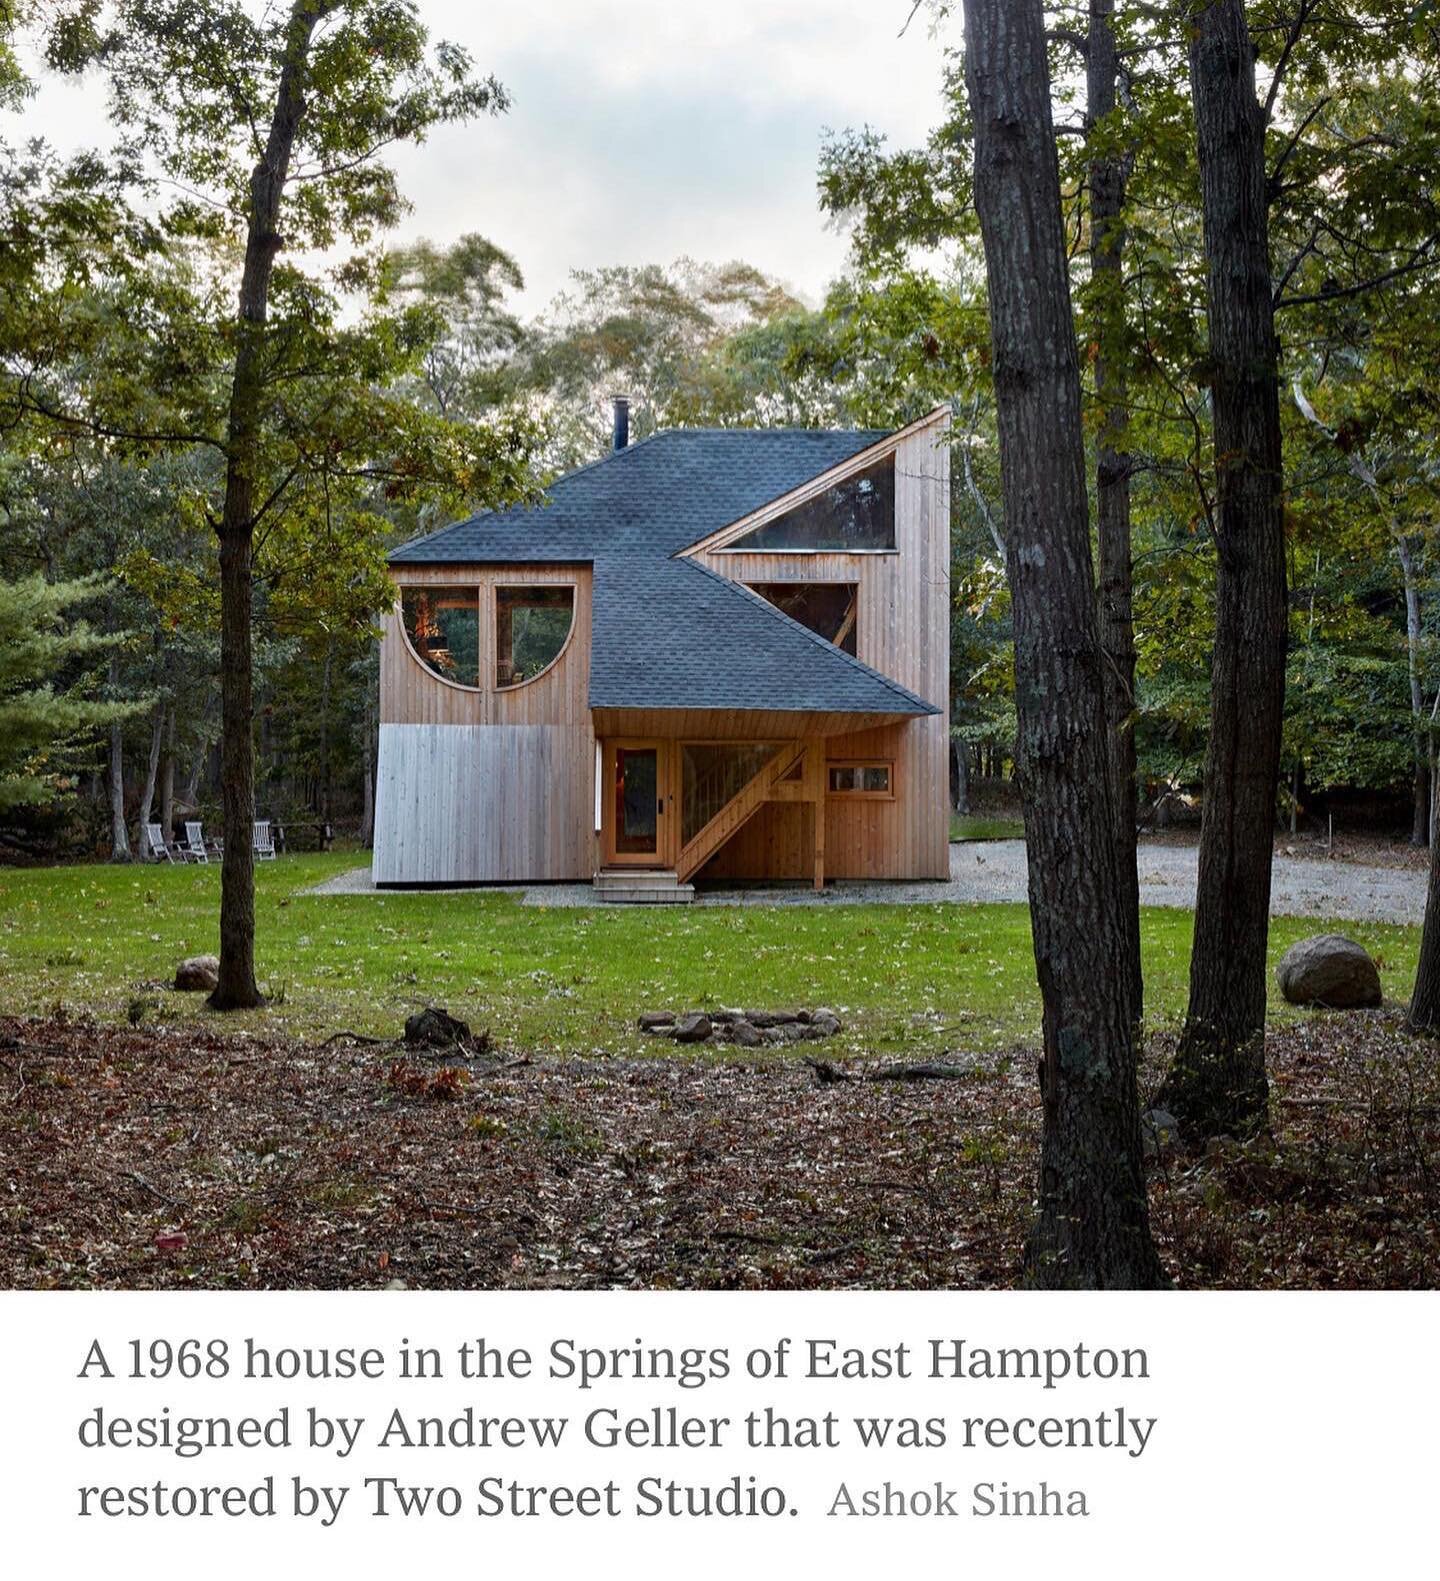 Fun to see the @the_antler_house in the @nytimes today. @widgetfactoryco and @idesofblue getting the recognition they deserve! #hamptons #midcenturymodern #antlerhouse #andrewgeller #vacationhome #cedar #architecture #springs #easthampton